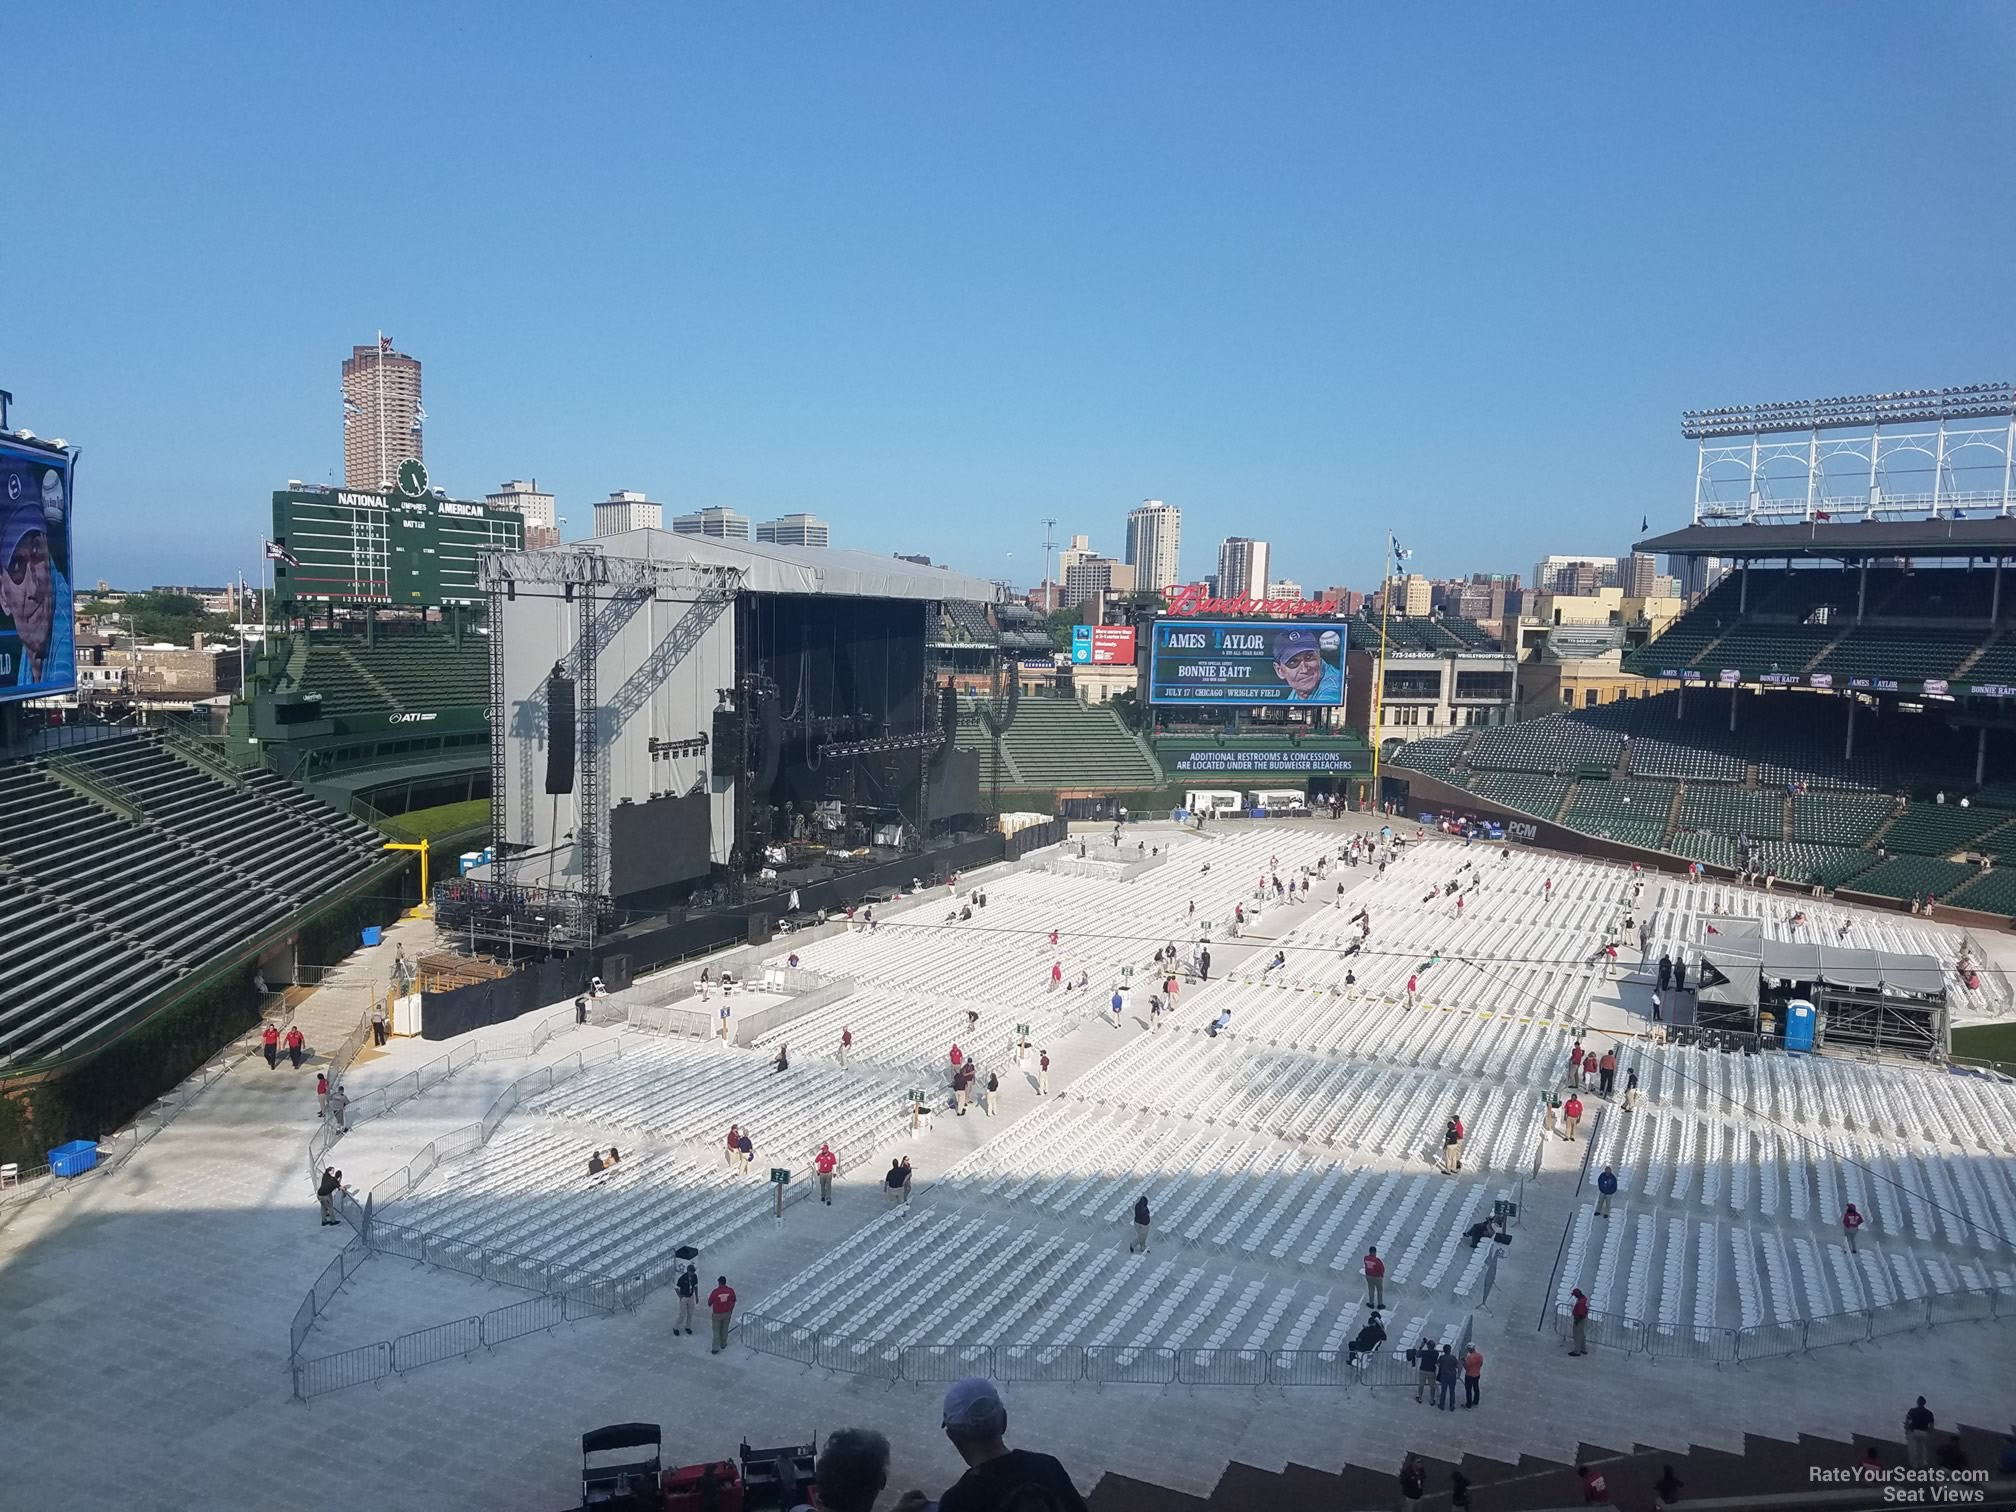 section 305, row 7 seat view  for concert - wrigley field